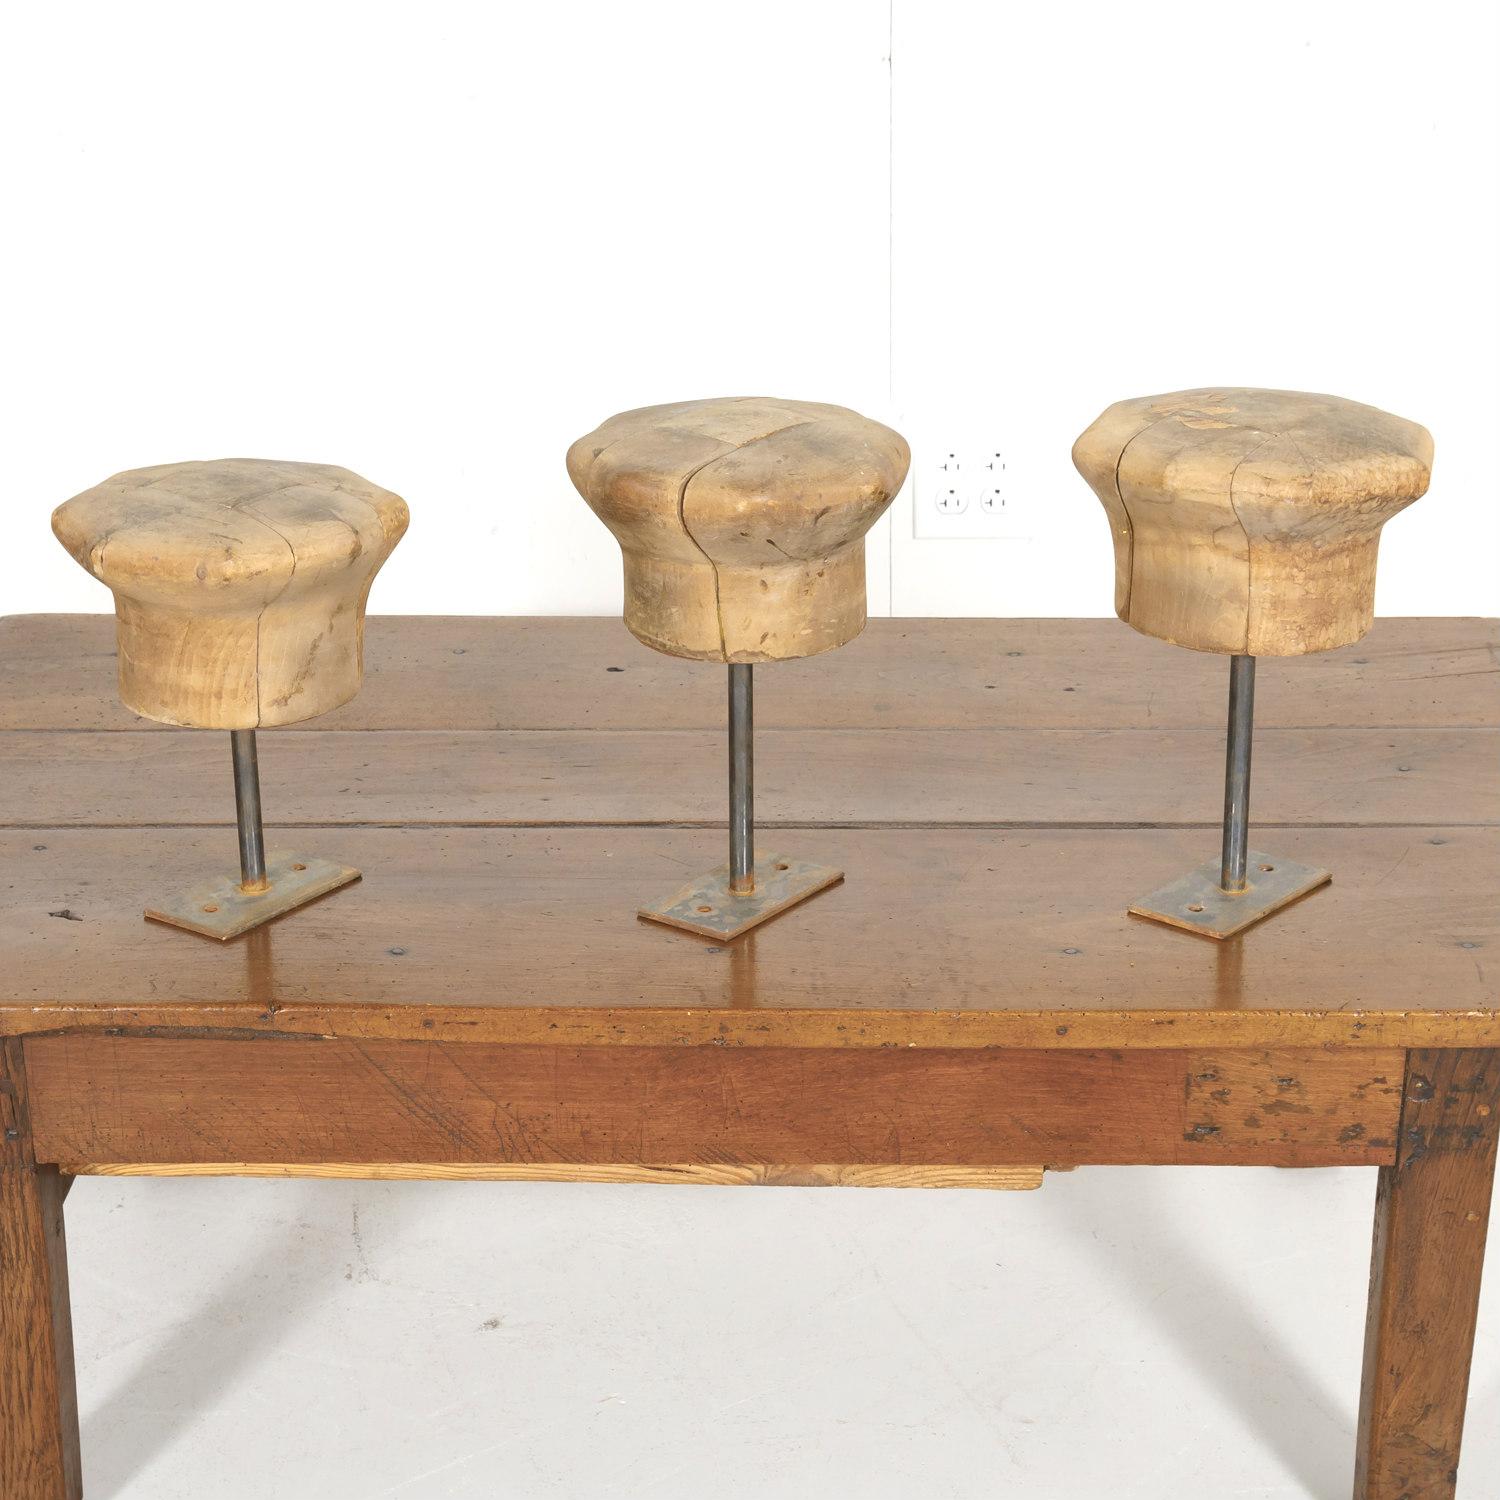 Antique Wooden French Hat Molds or Blocks, Set of 3 For Sale 3